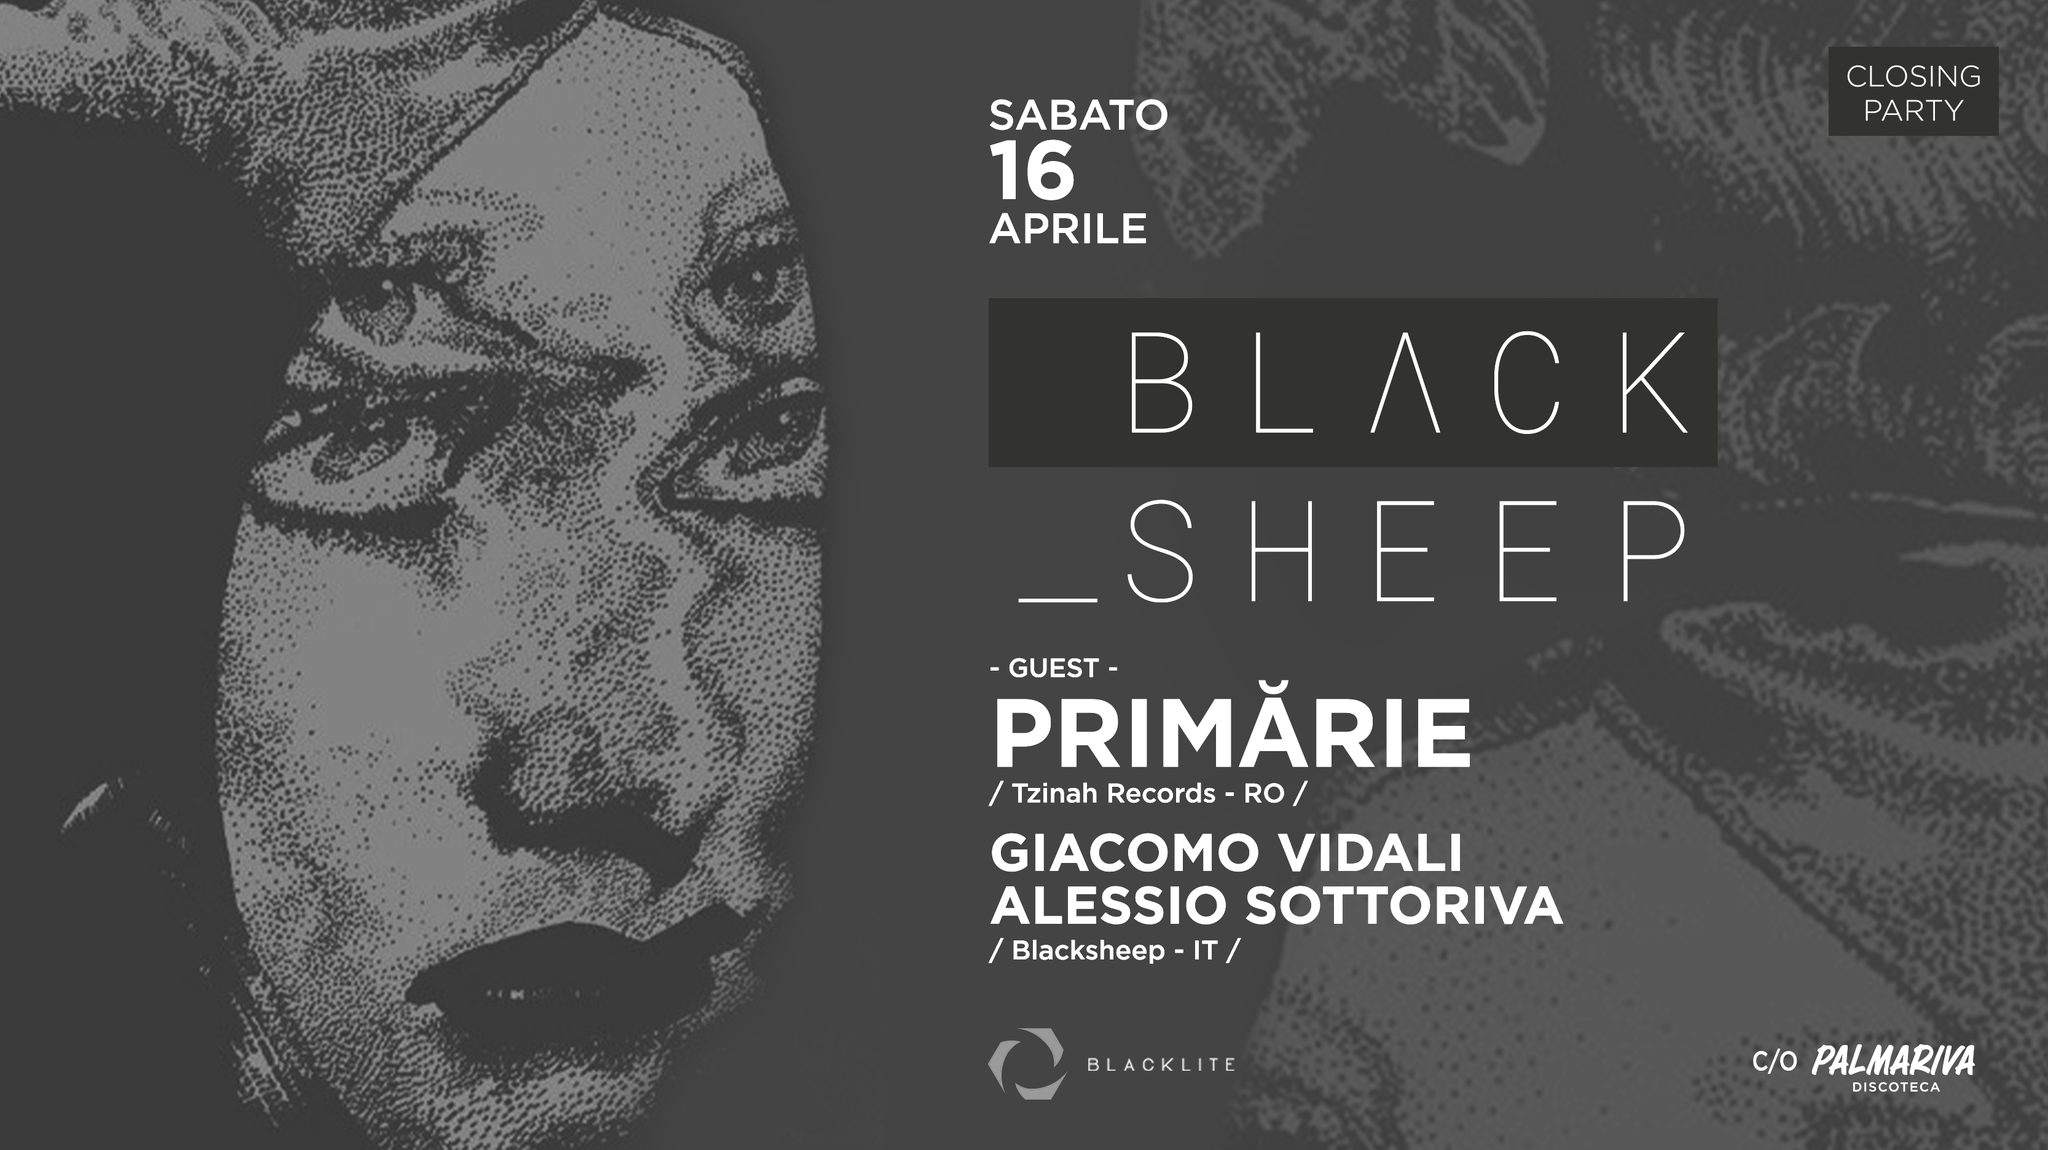 Black_sheep closing party with Primărie